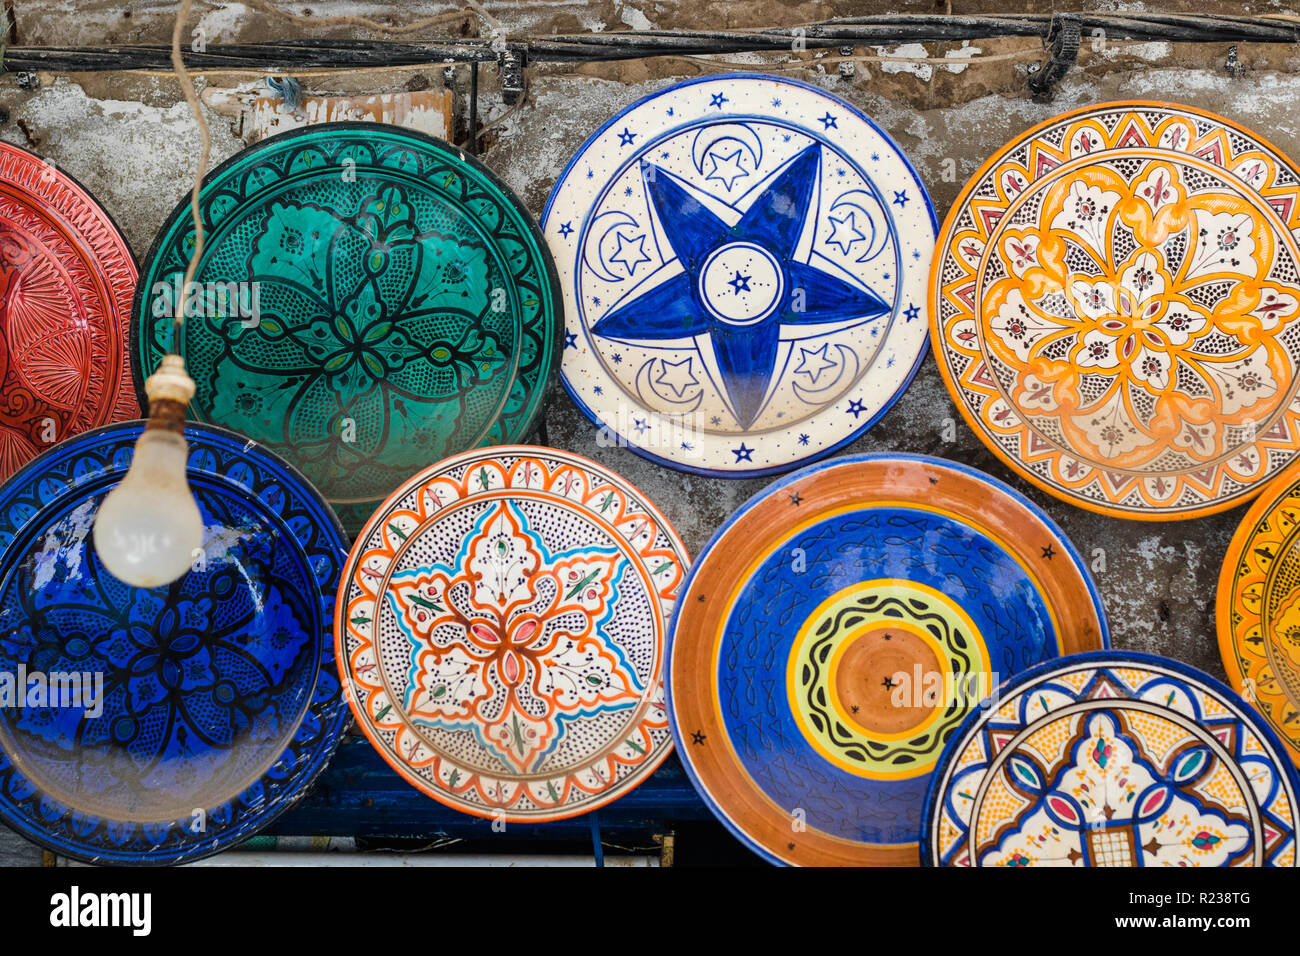 Pottery plates on display. Morocco, North Africa, Africa Stock Photo